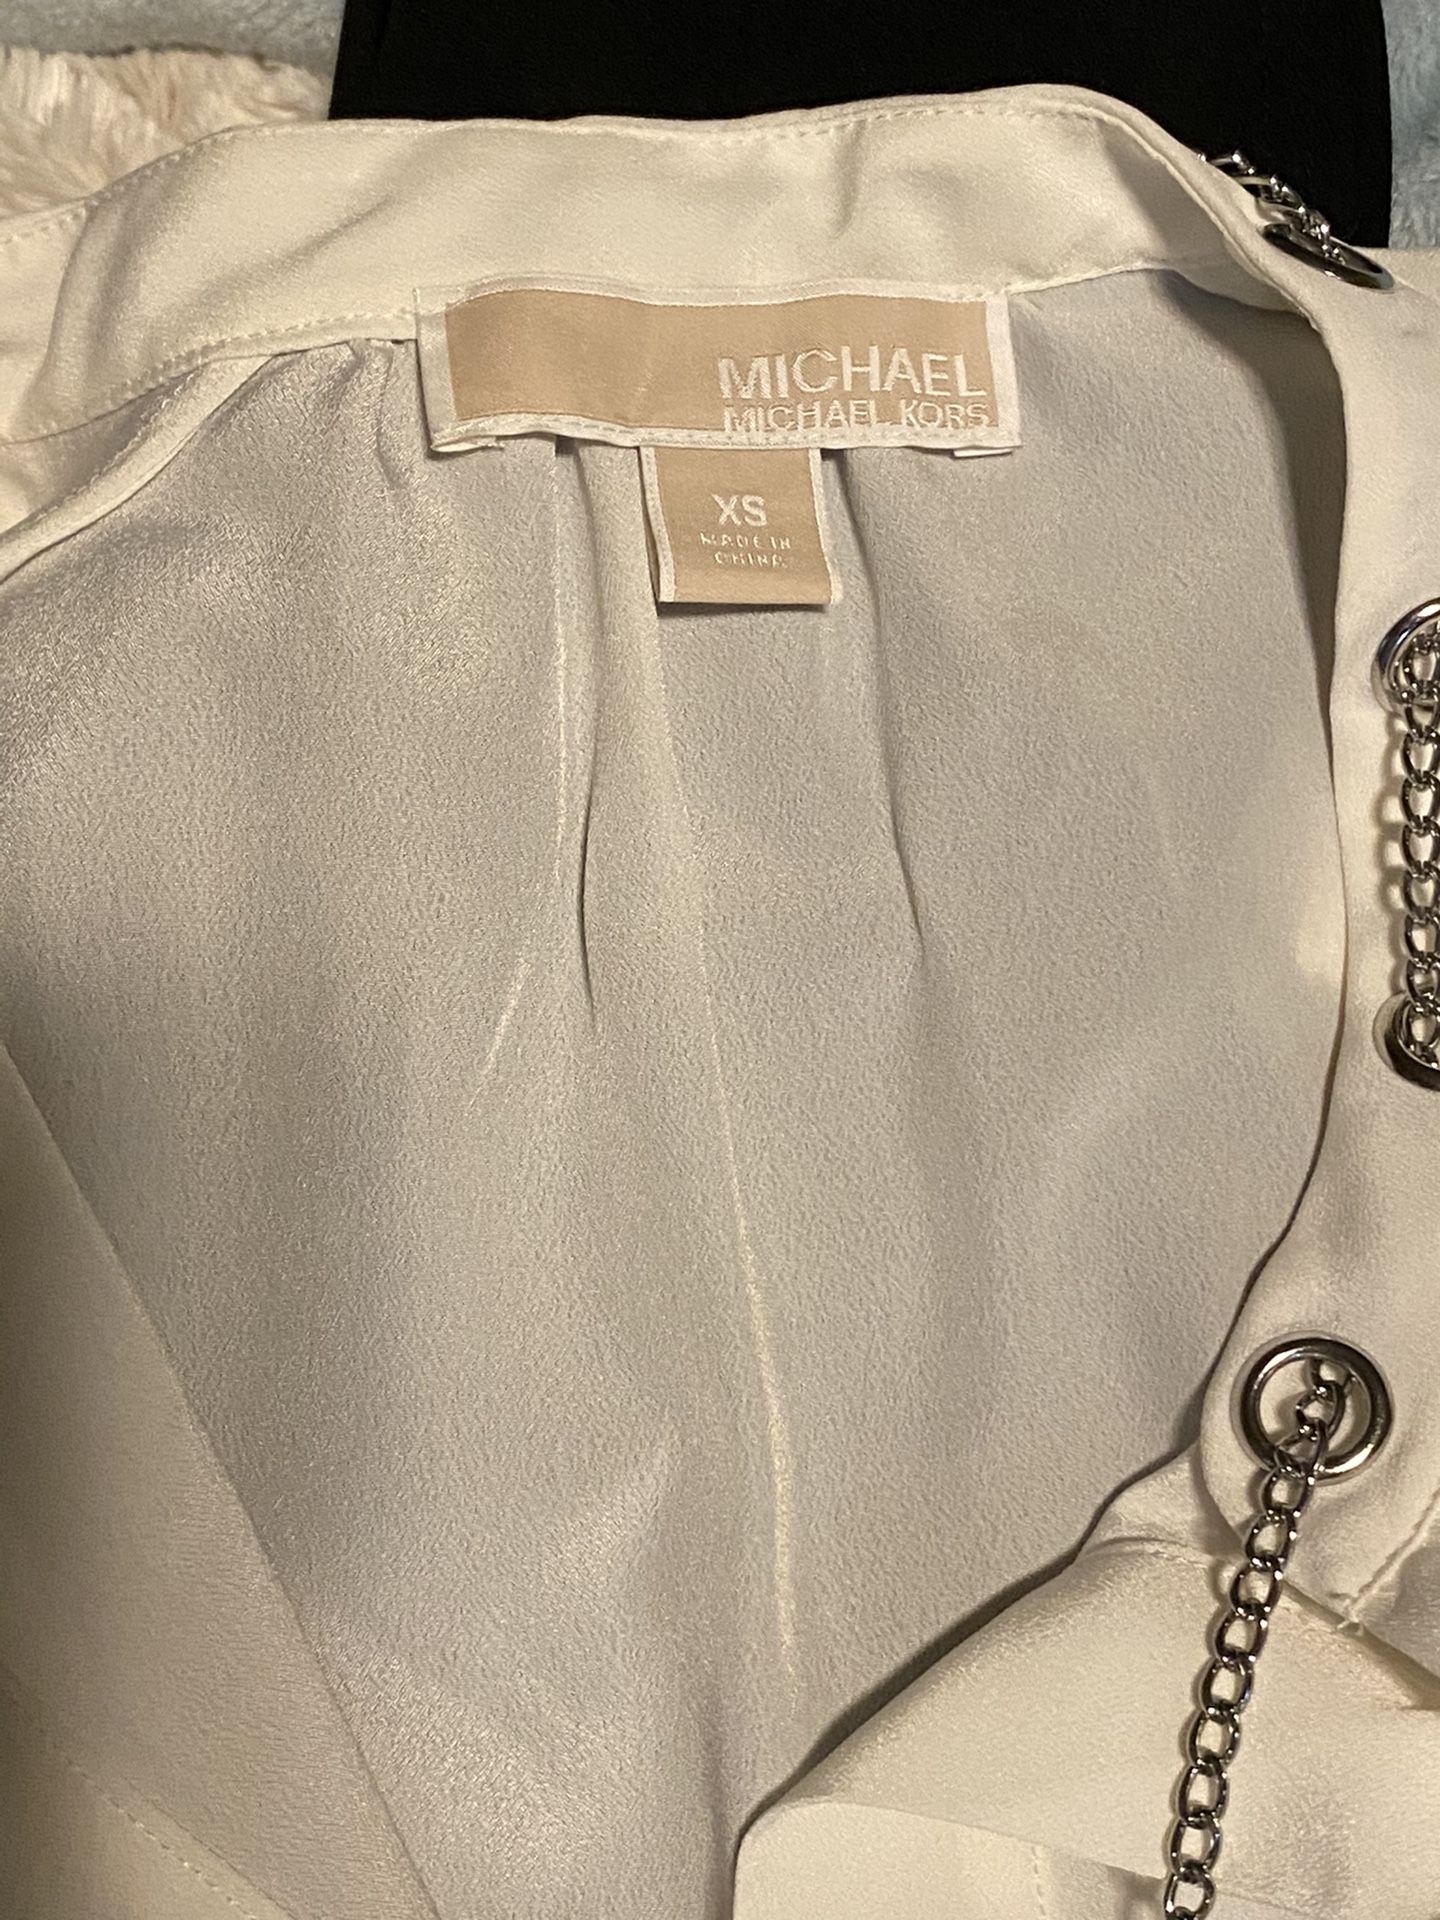 Michael Kors Ivory XS Top with Silver chain women’s